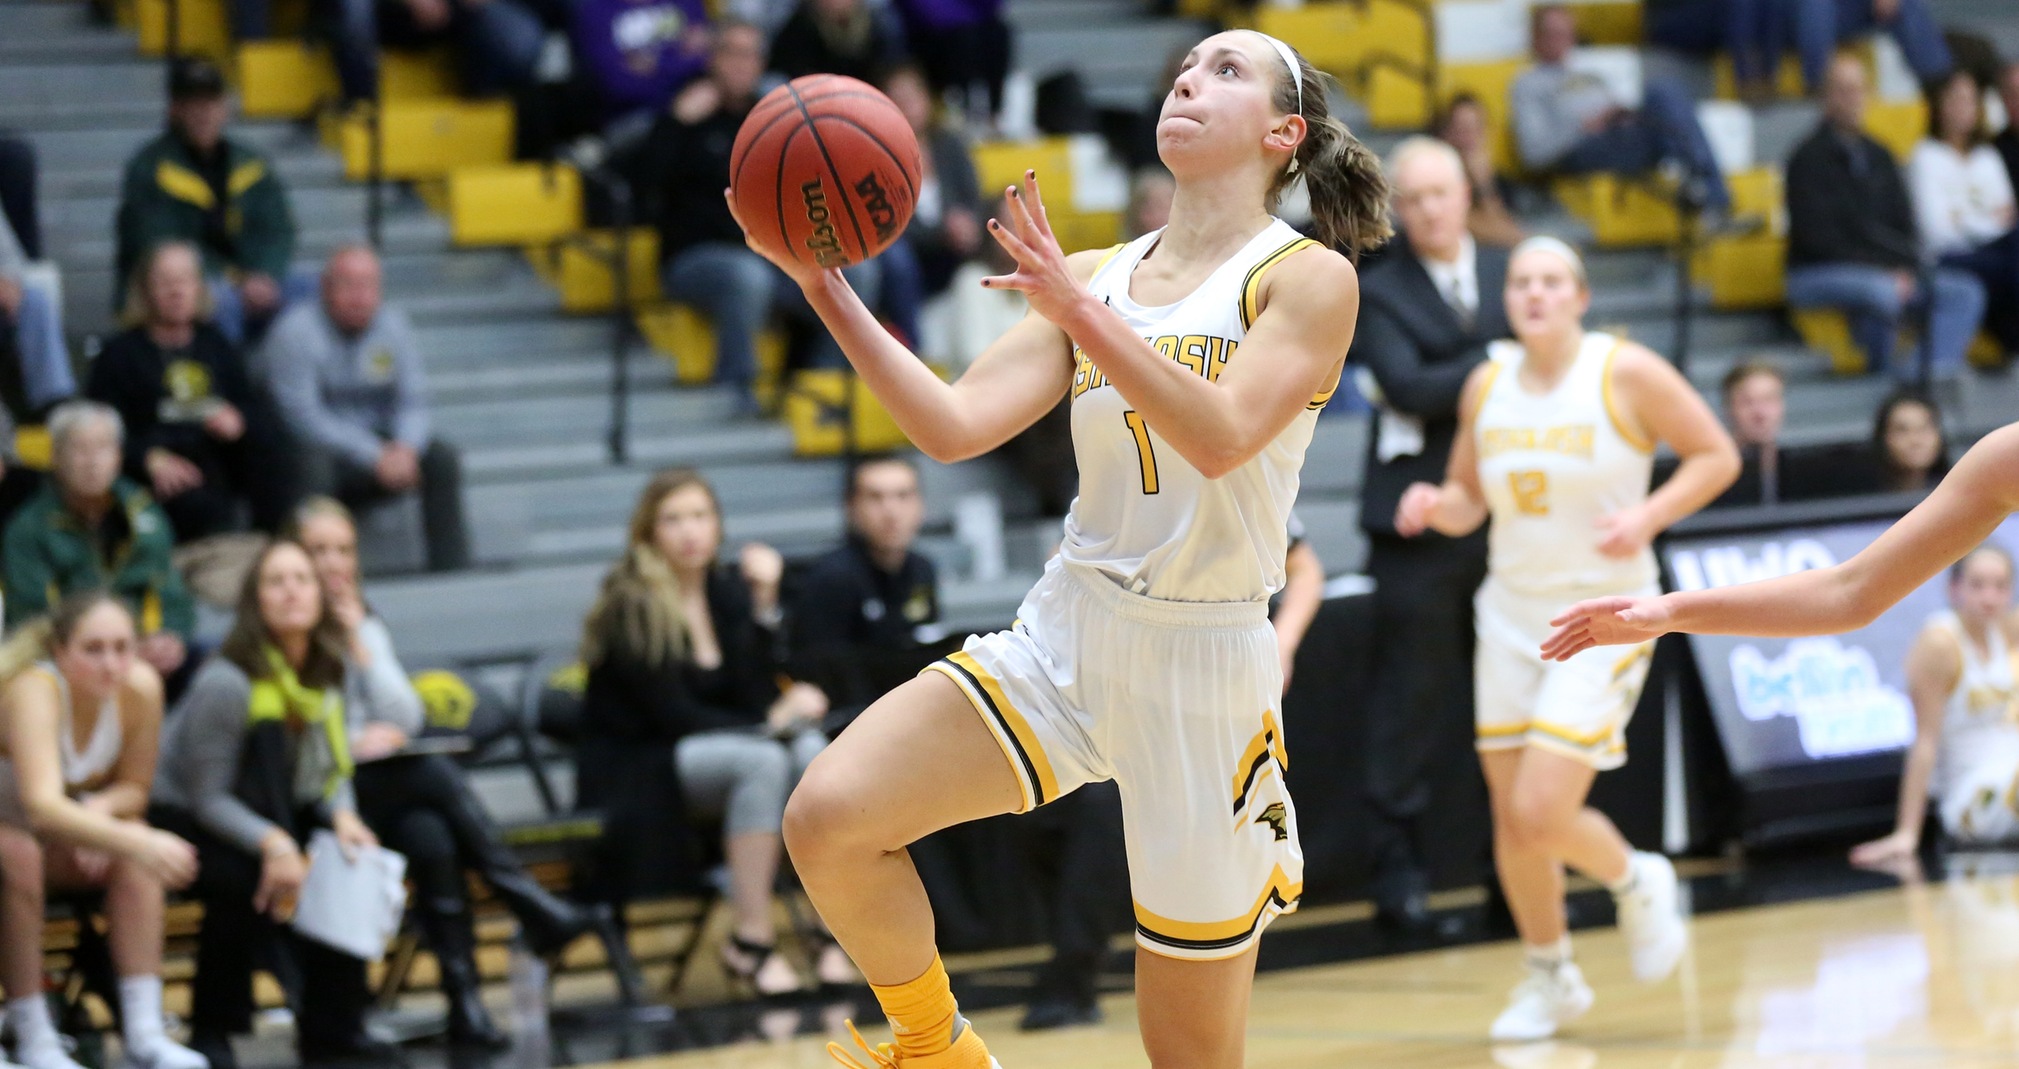 Olivia Campbell matched a career best by scoring 13 points against the Blugolds.